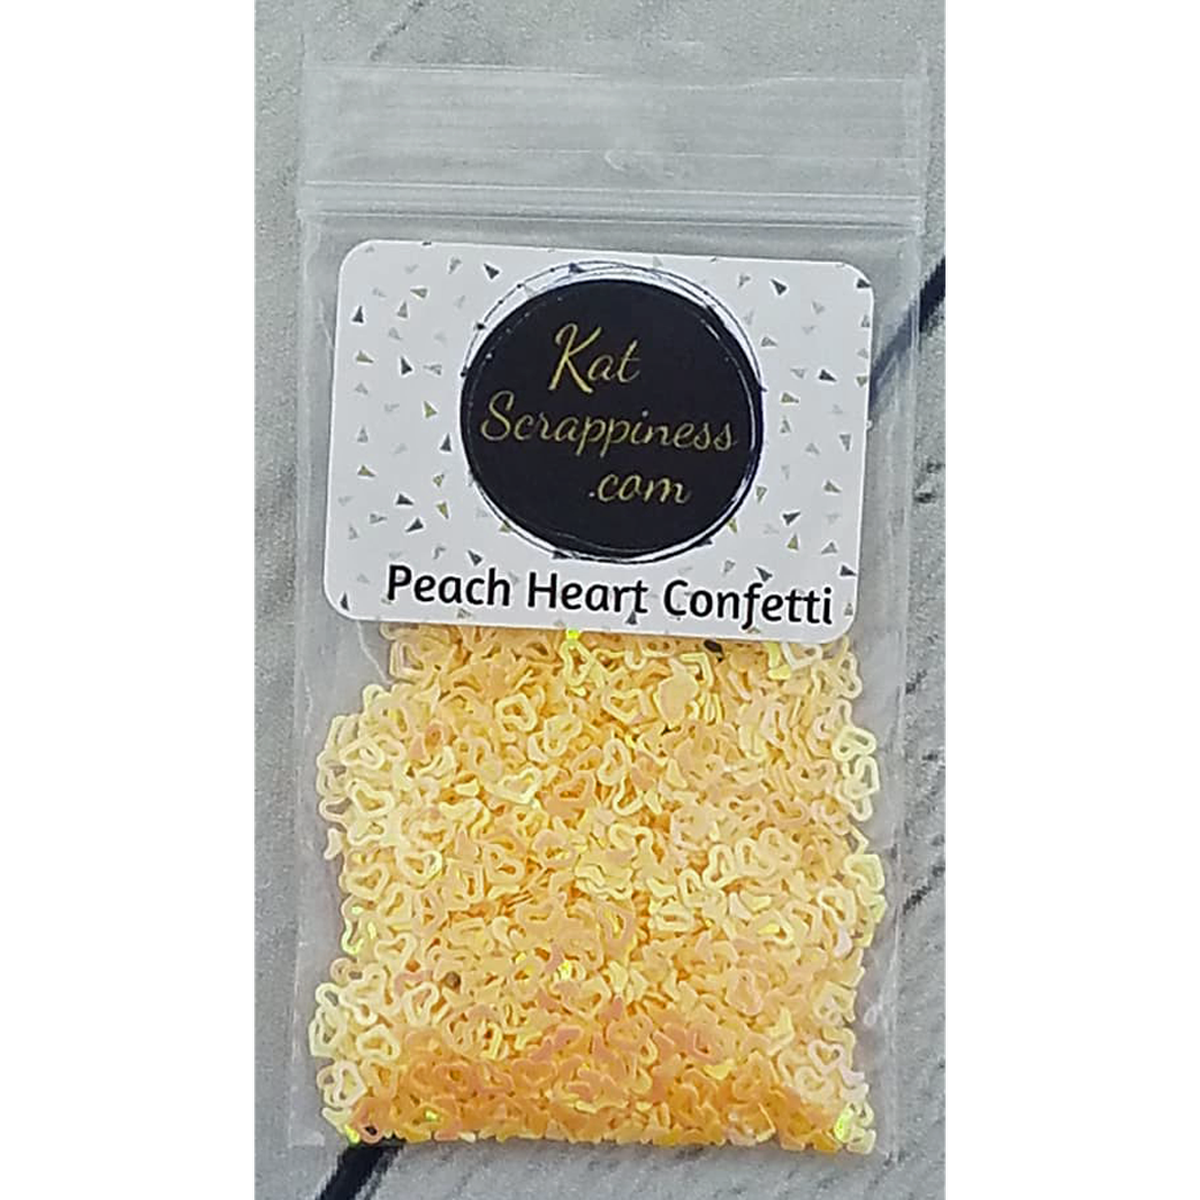 Peach (Hollow) Heart Confetti Sequins - Kat Scrappiness